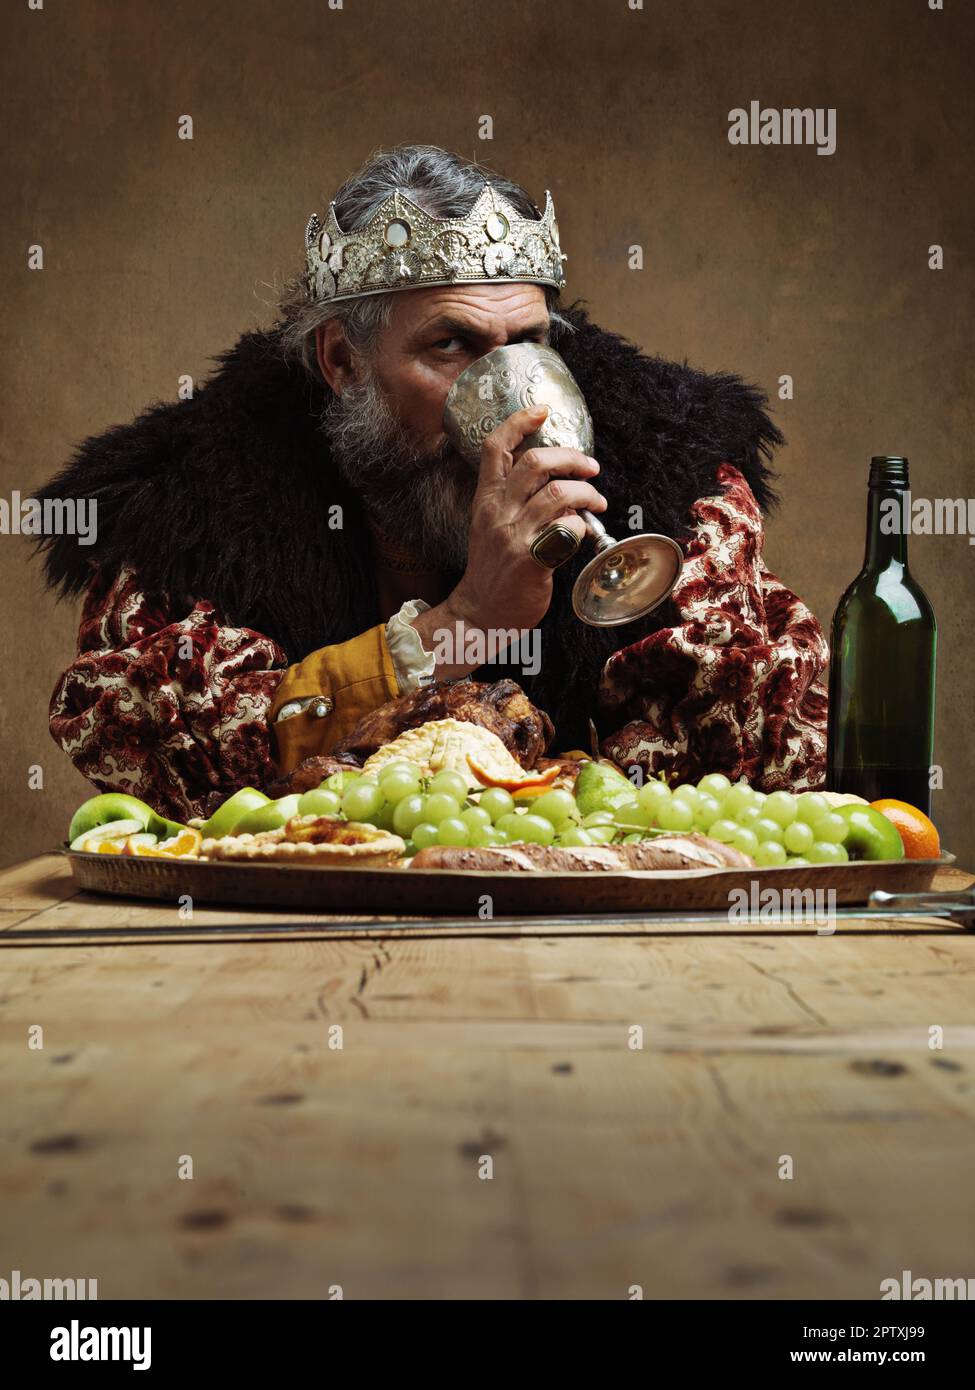 Drink deep to ease the woes of rule. A mature king feasting alone in a banquet hall Stock Photo